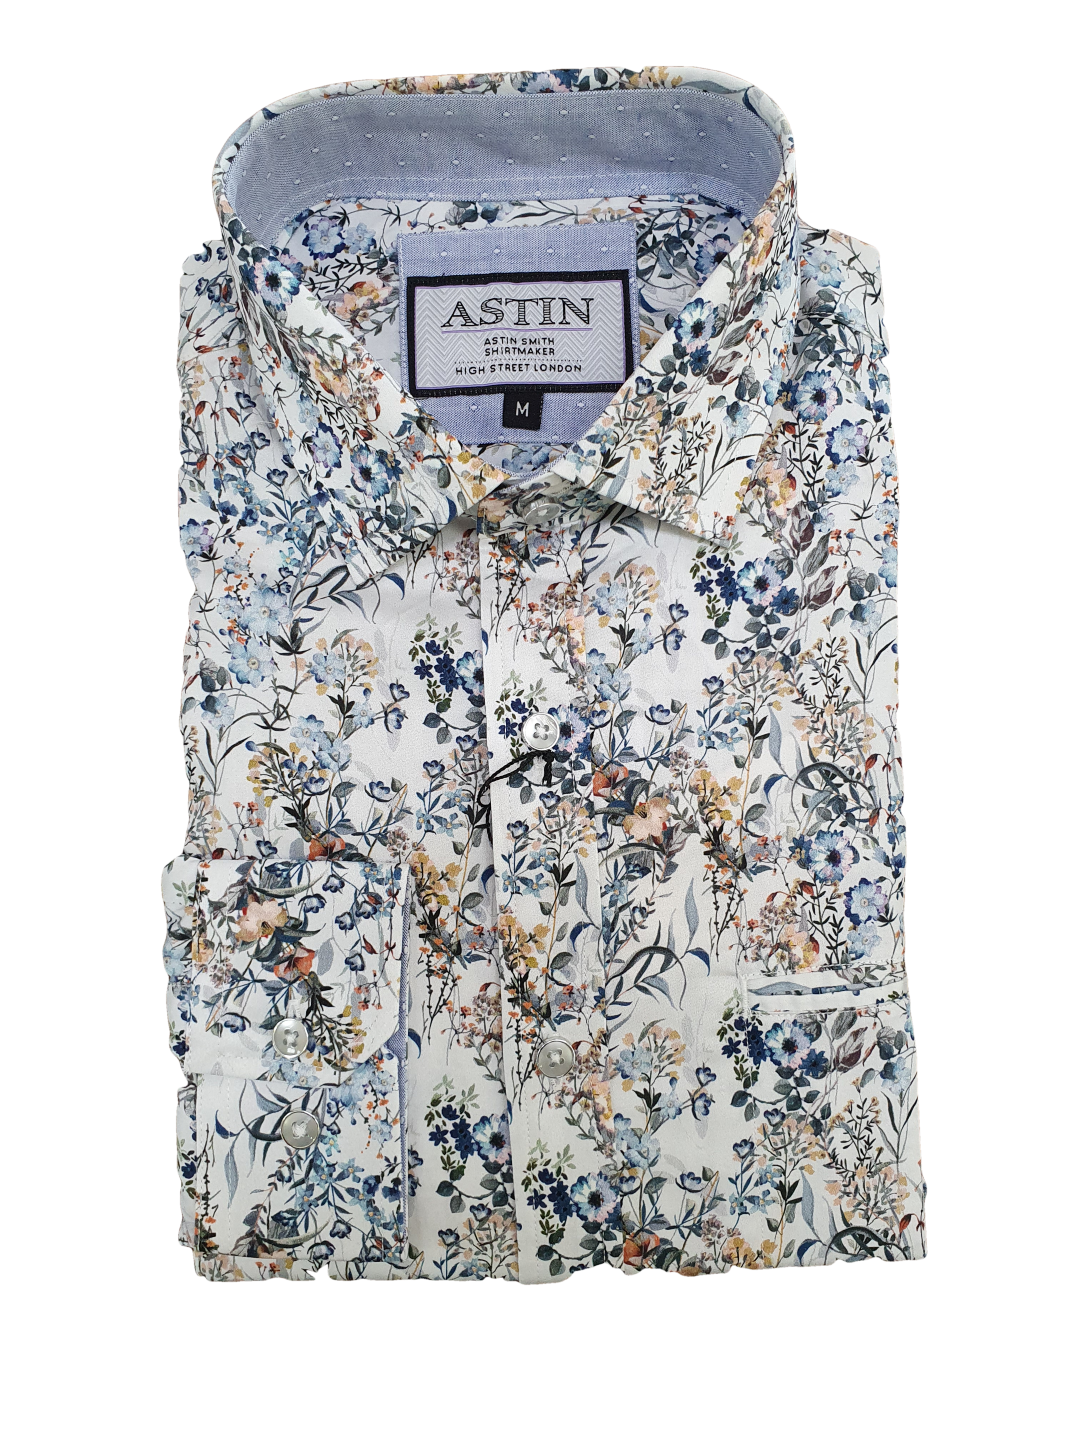 Astin Smith Long Sleeve Antique floral Print Shirt - L066-AS